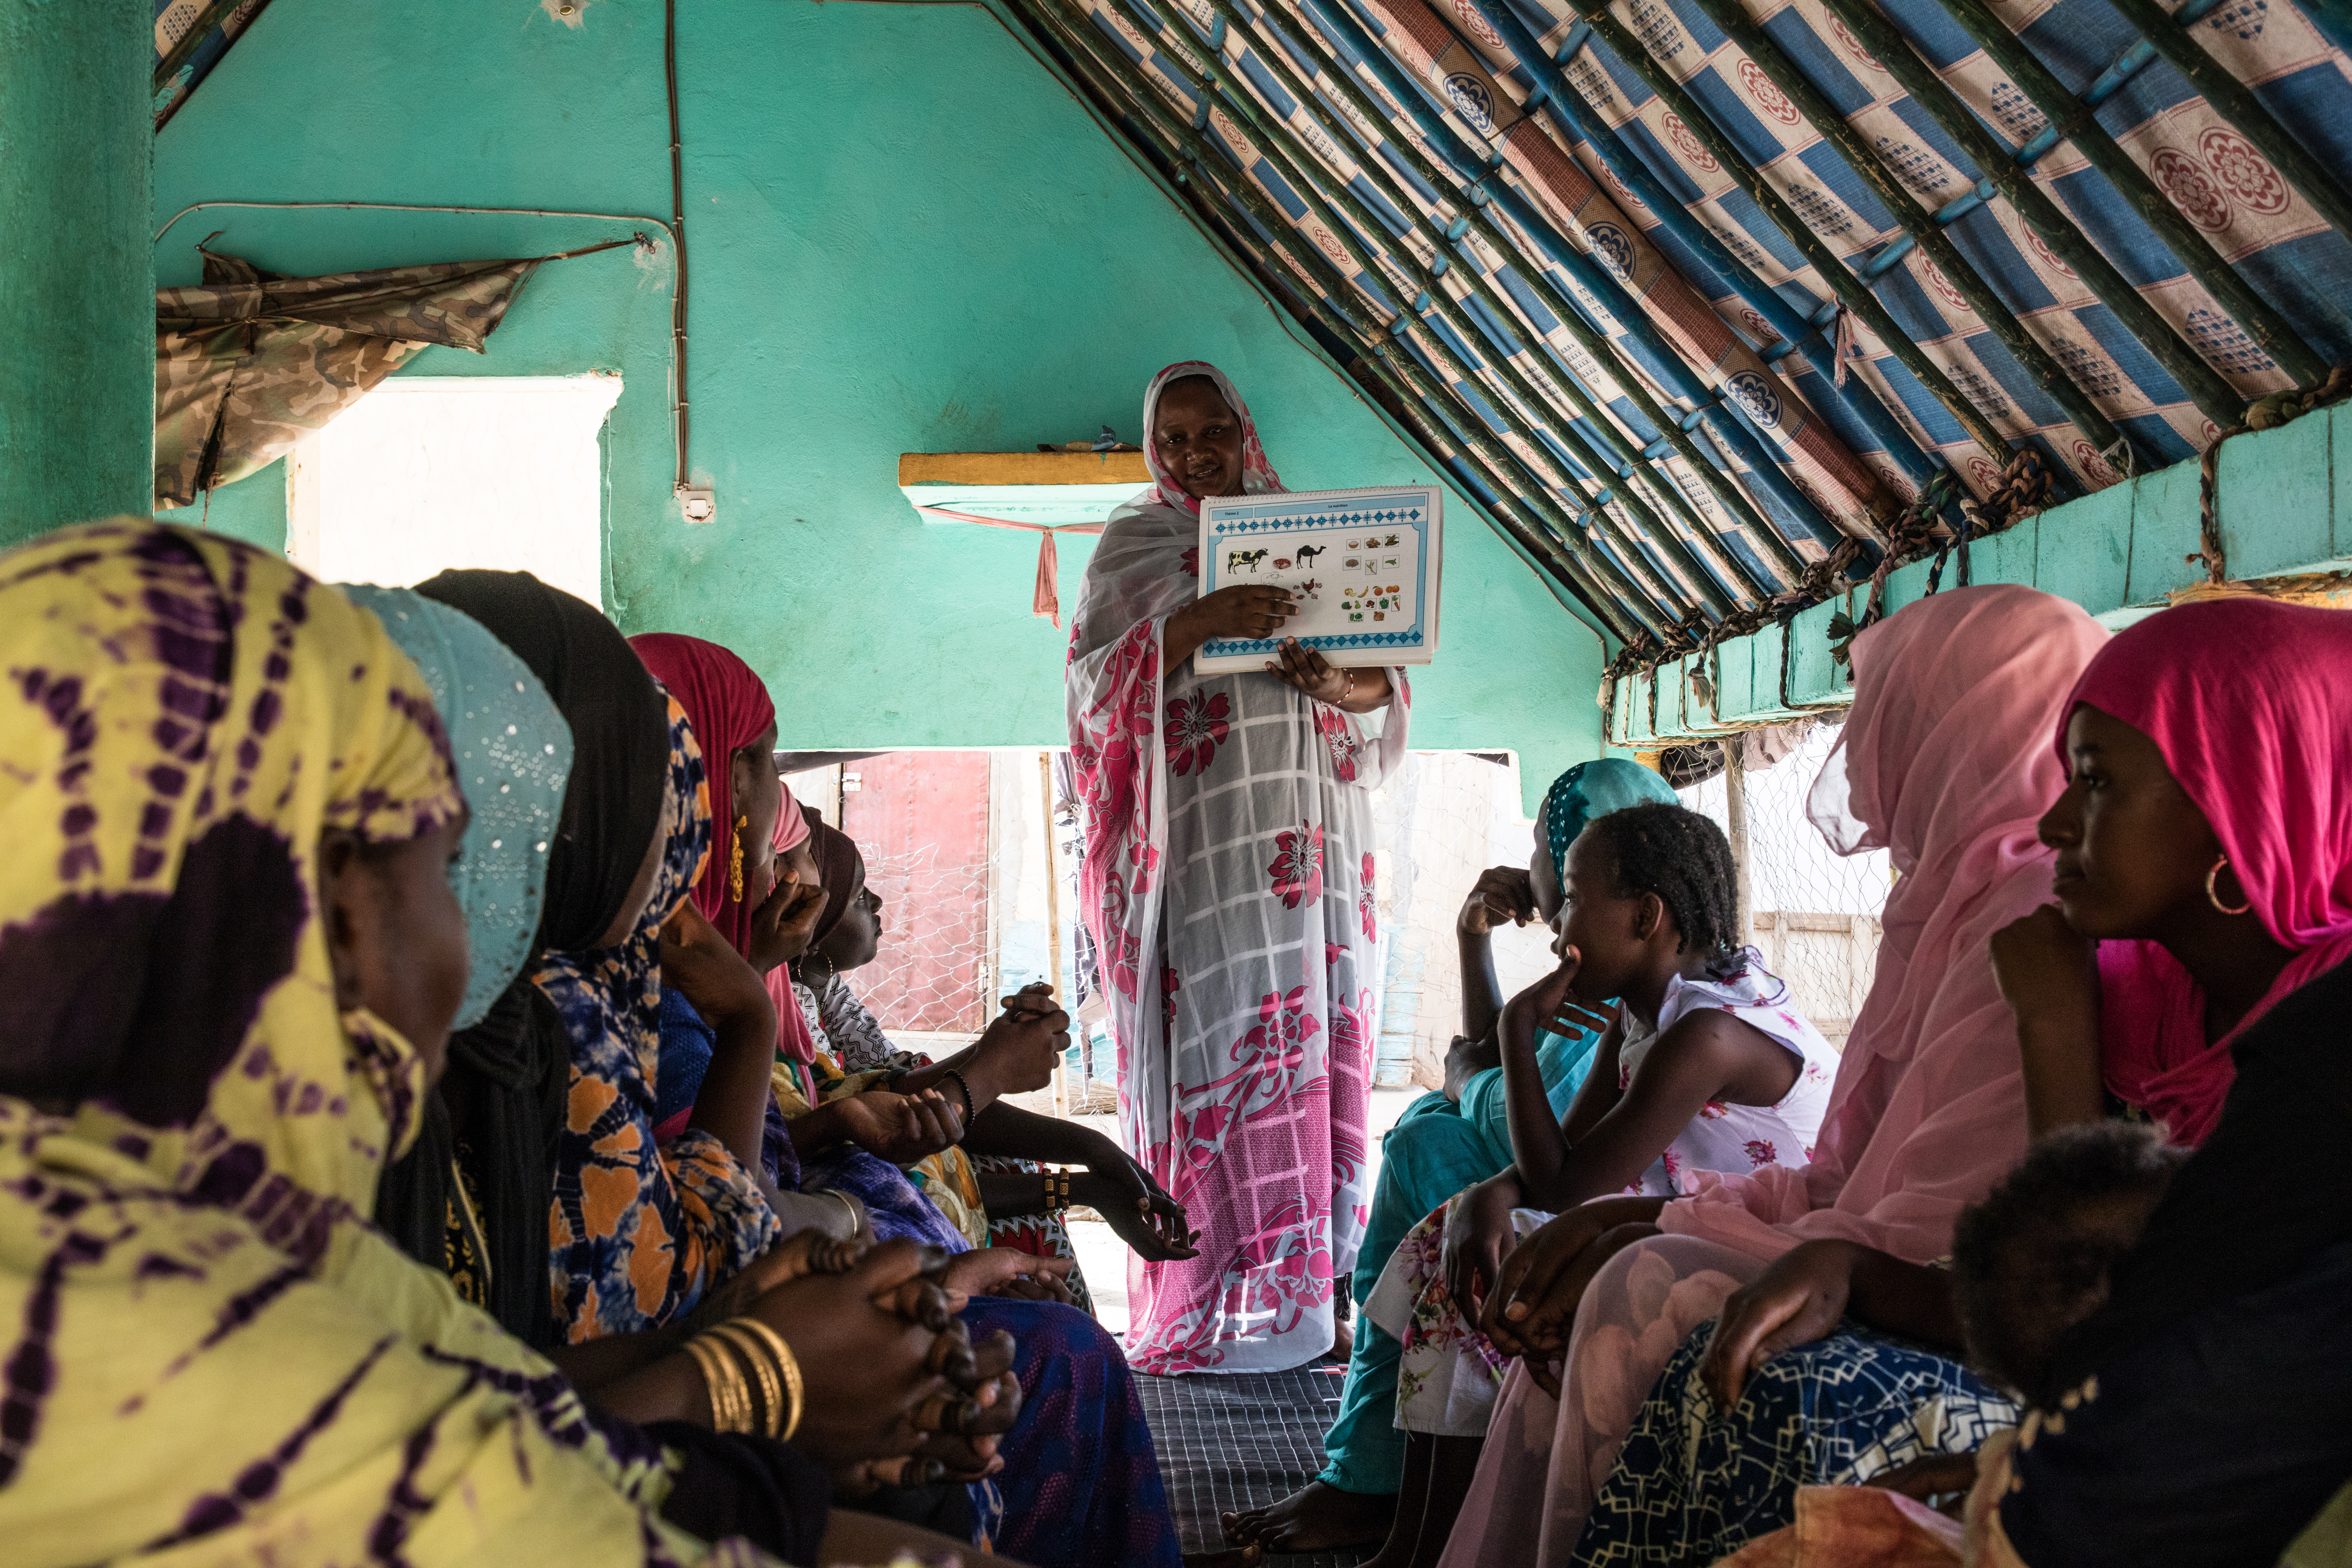 community worker presents to women in Mauritania. Photo by Vincent Tremeau/ World Bank